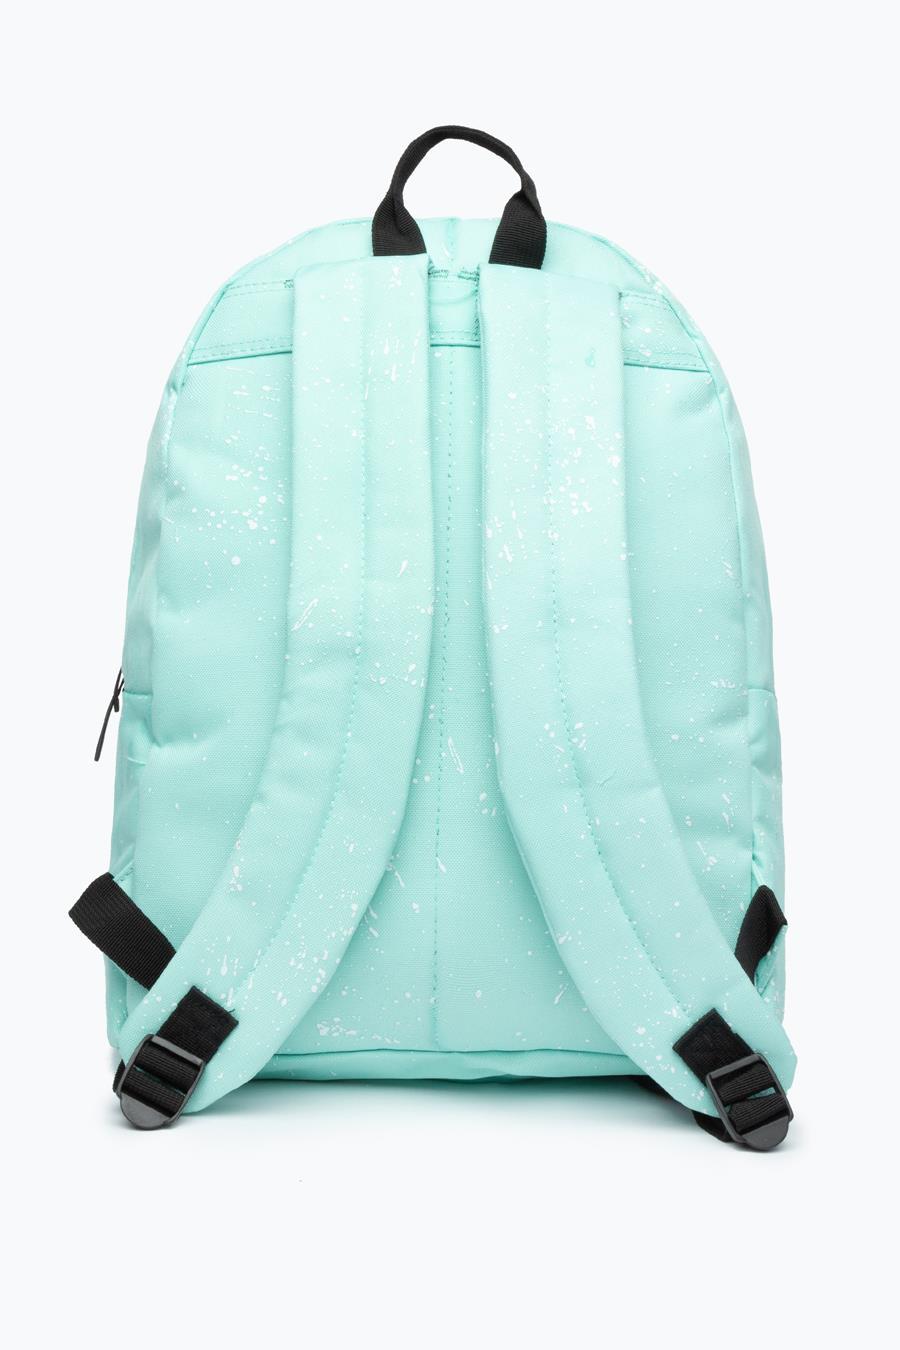 HYPE MINT WITH WHITE SPECKLE BACKPACK